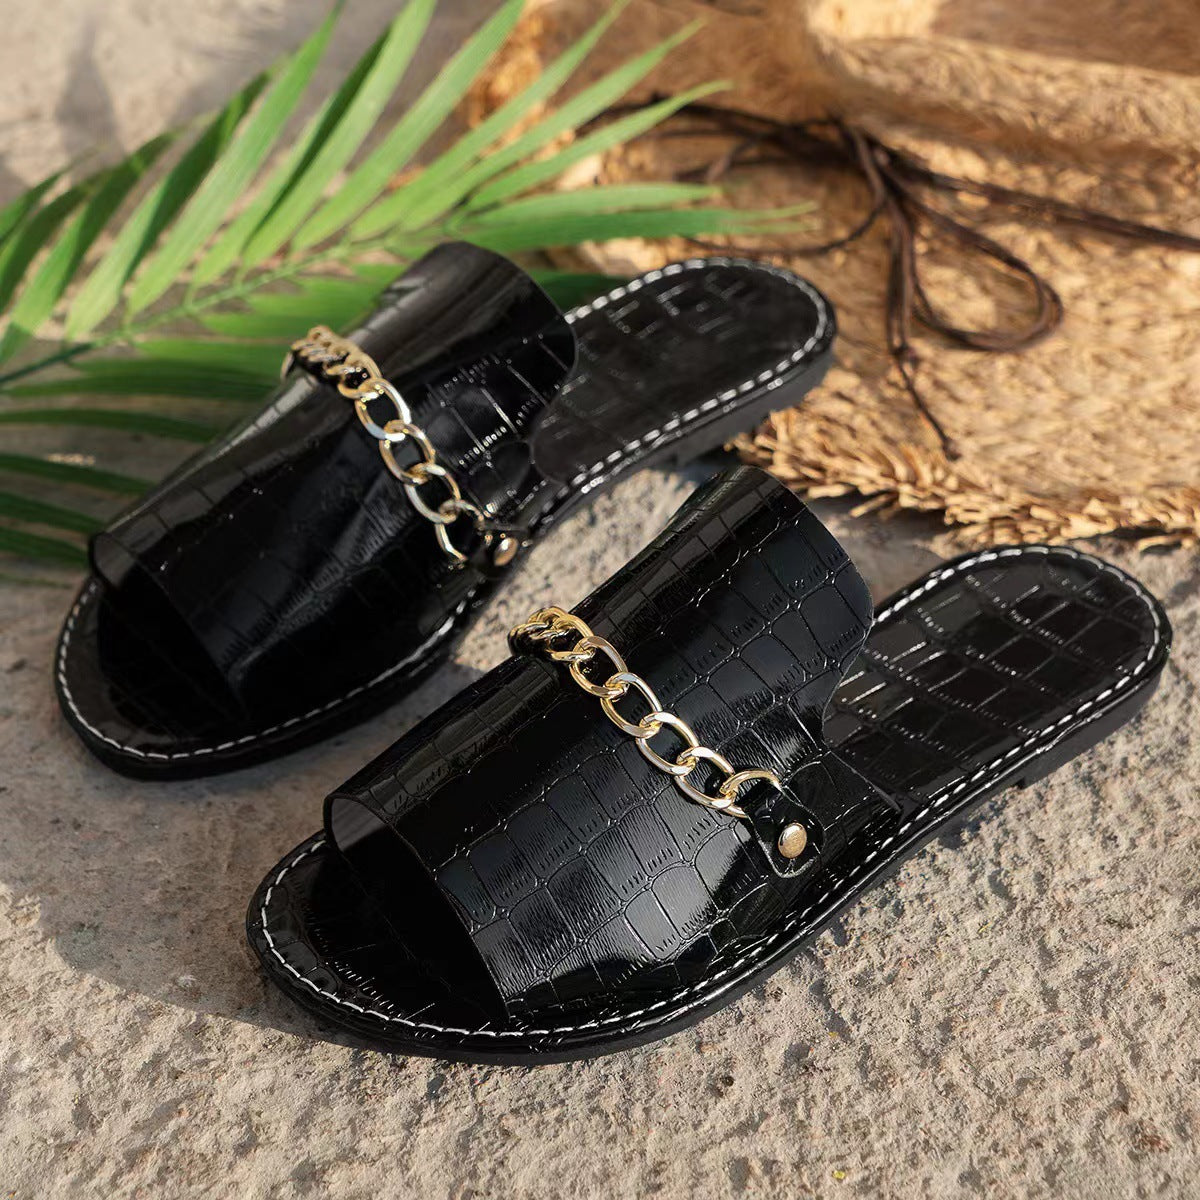 Pattern Chains Sandals Summer Fish Mouth Flat Slides Shoes Women Casual Vacation Beach Slippers